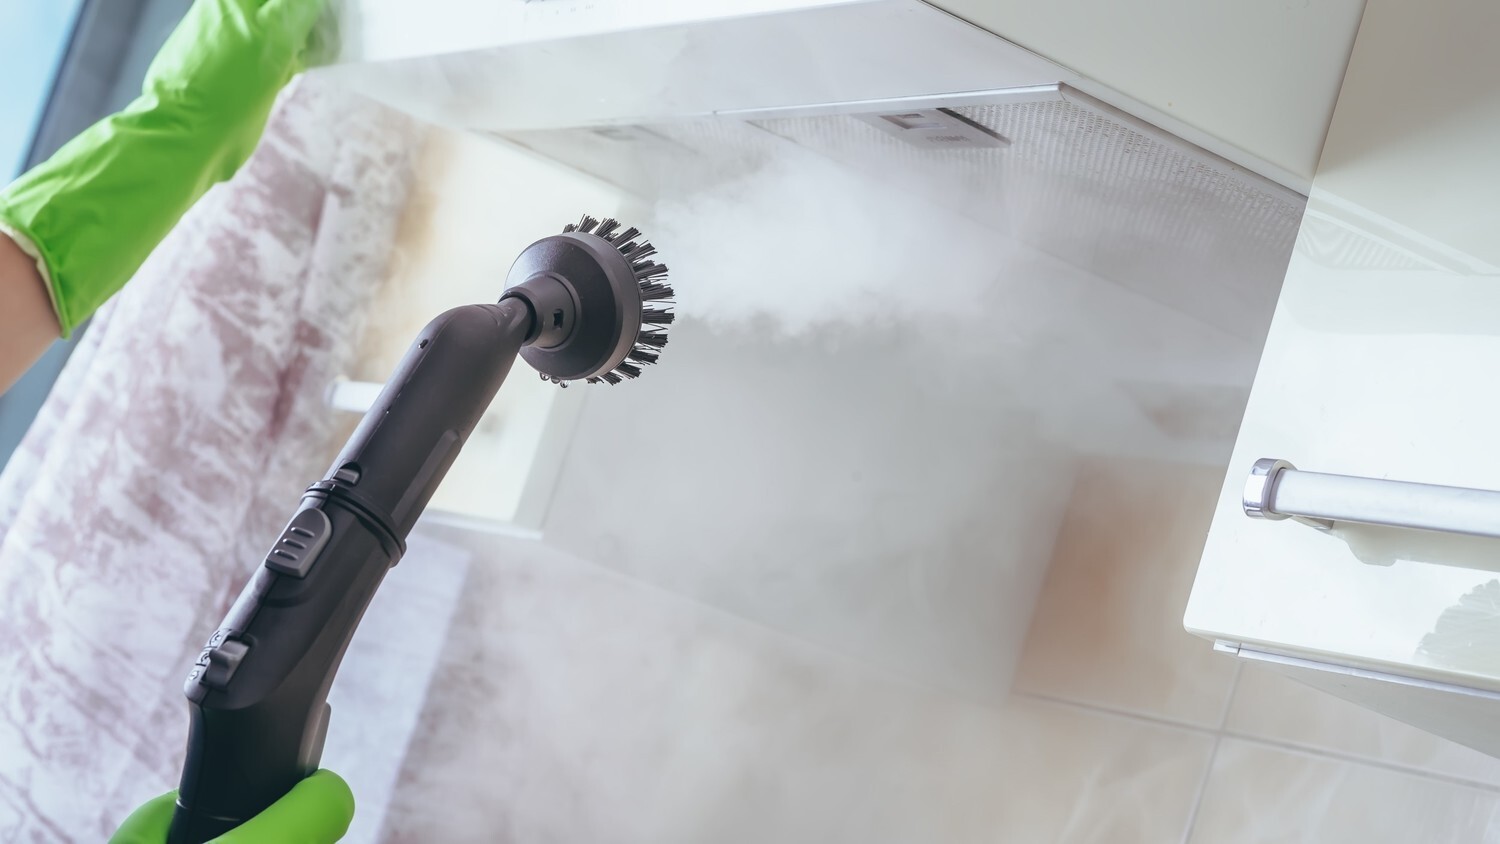 A person using a steam cleaner to clean a kitchen range hood.